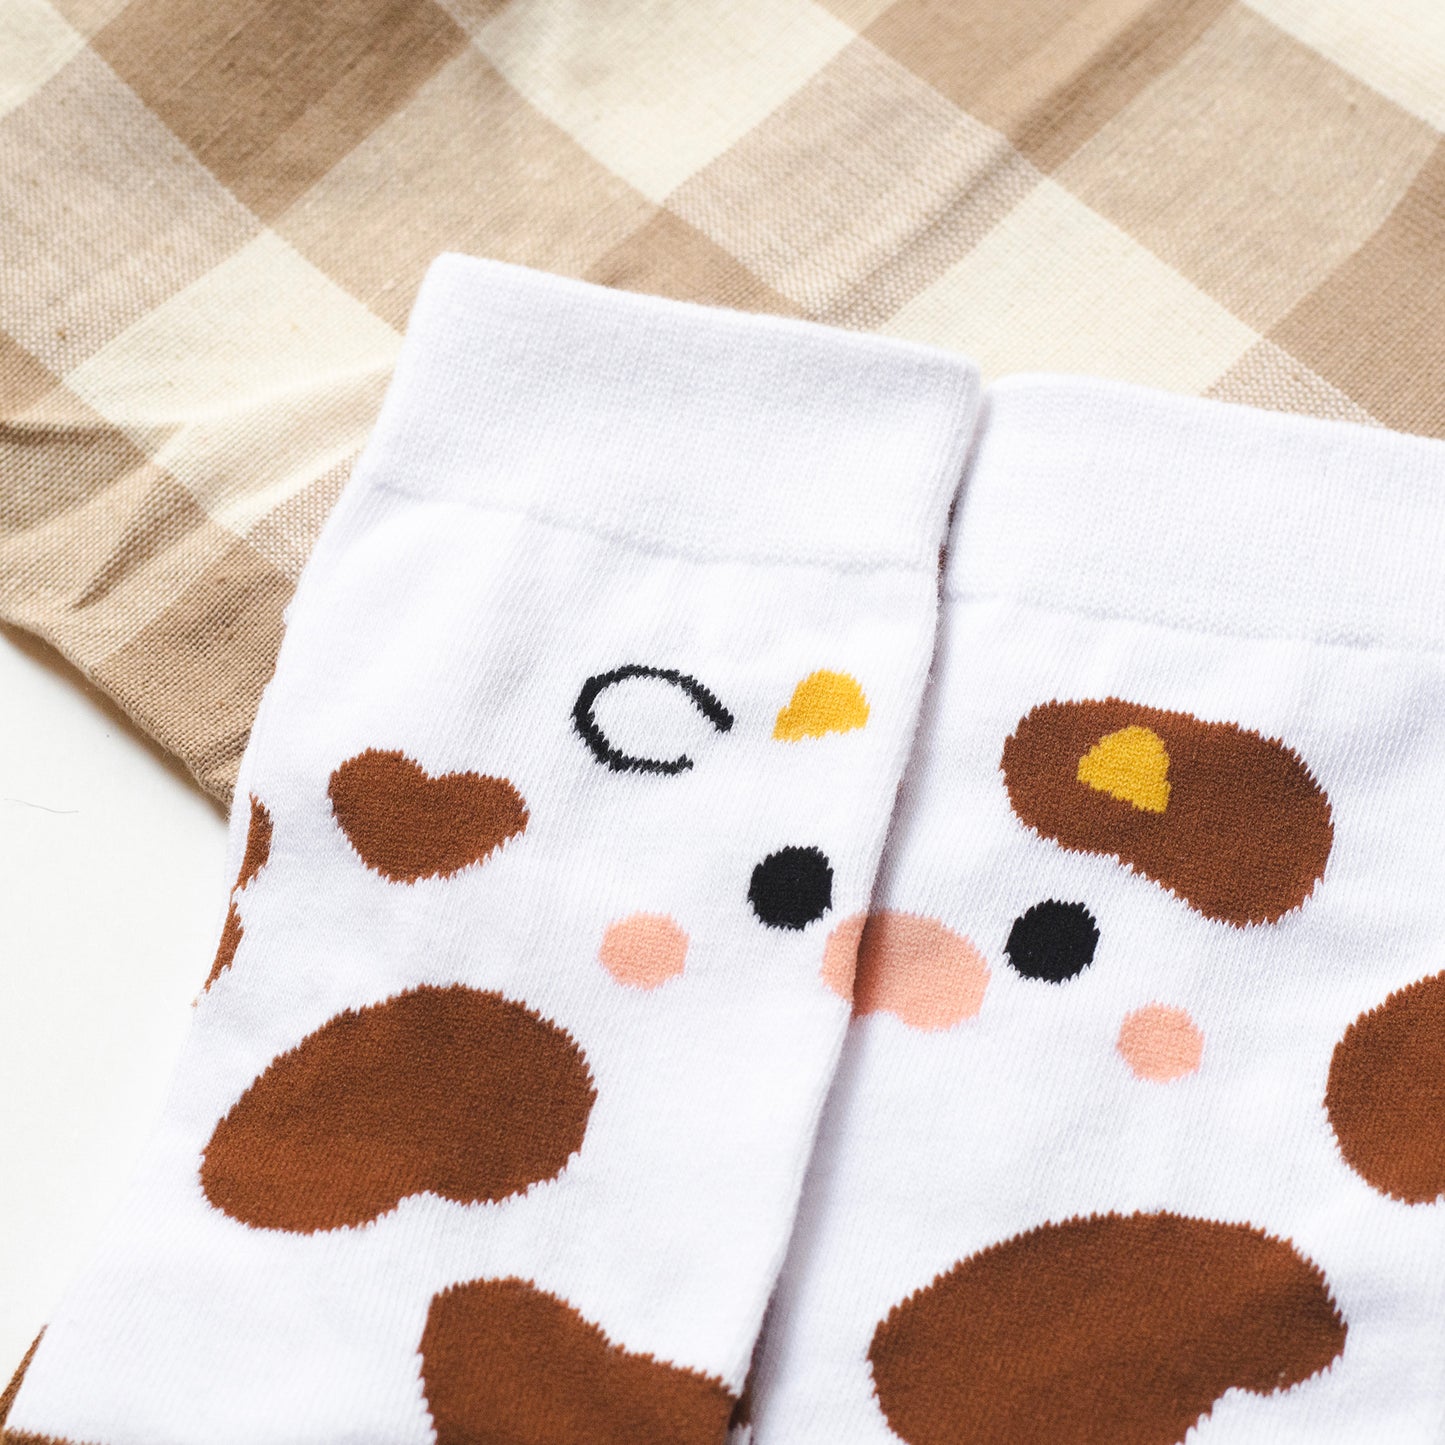 Cutie Cow Face - Brown and White - Socks